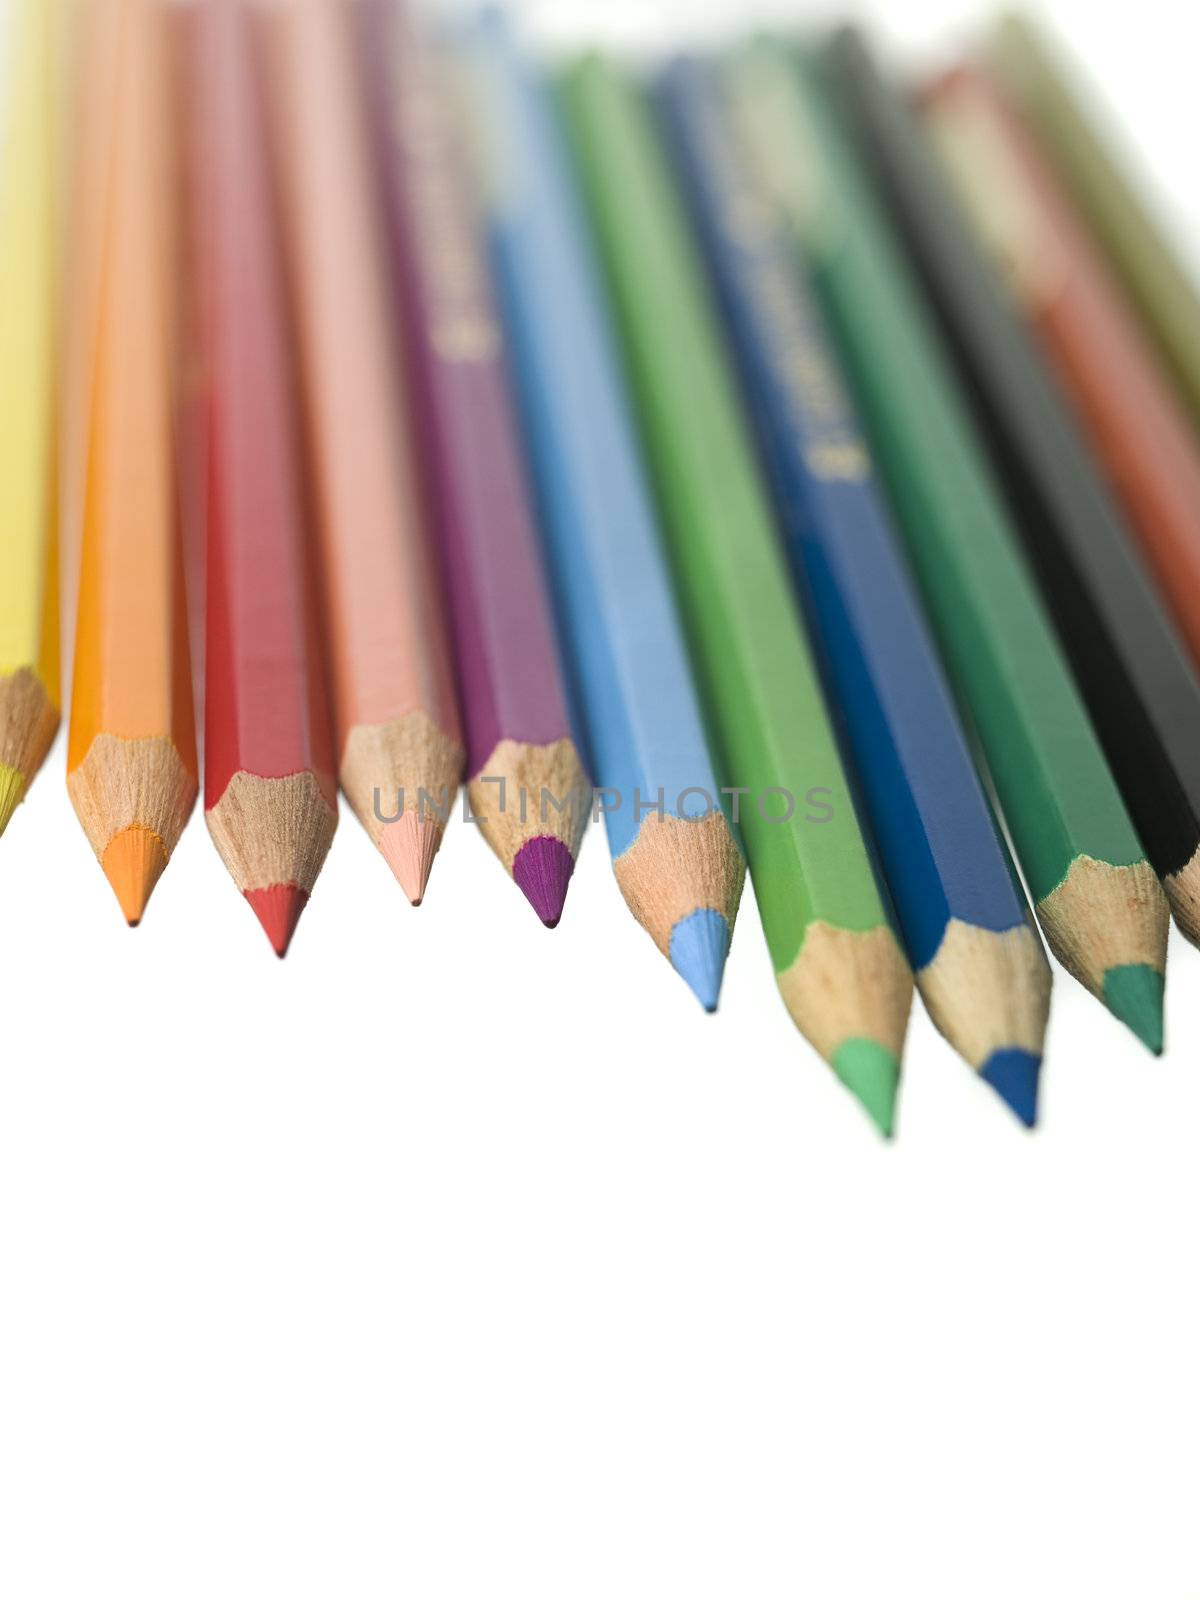 Row of colored pencil by gemenacom